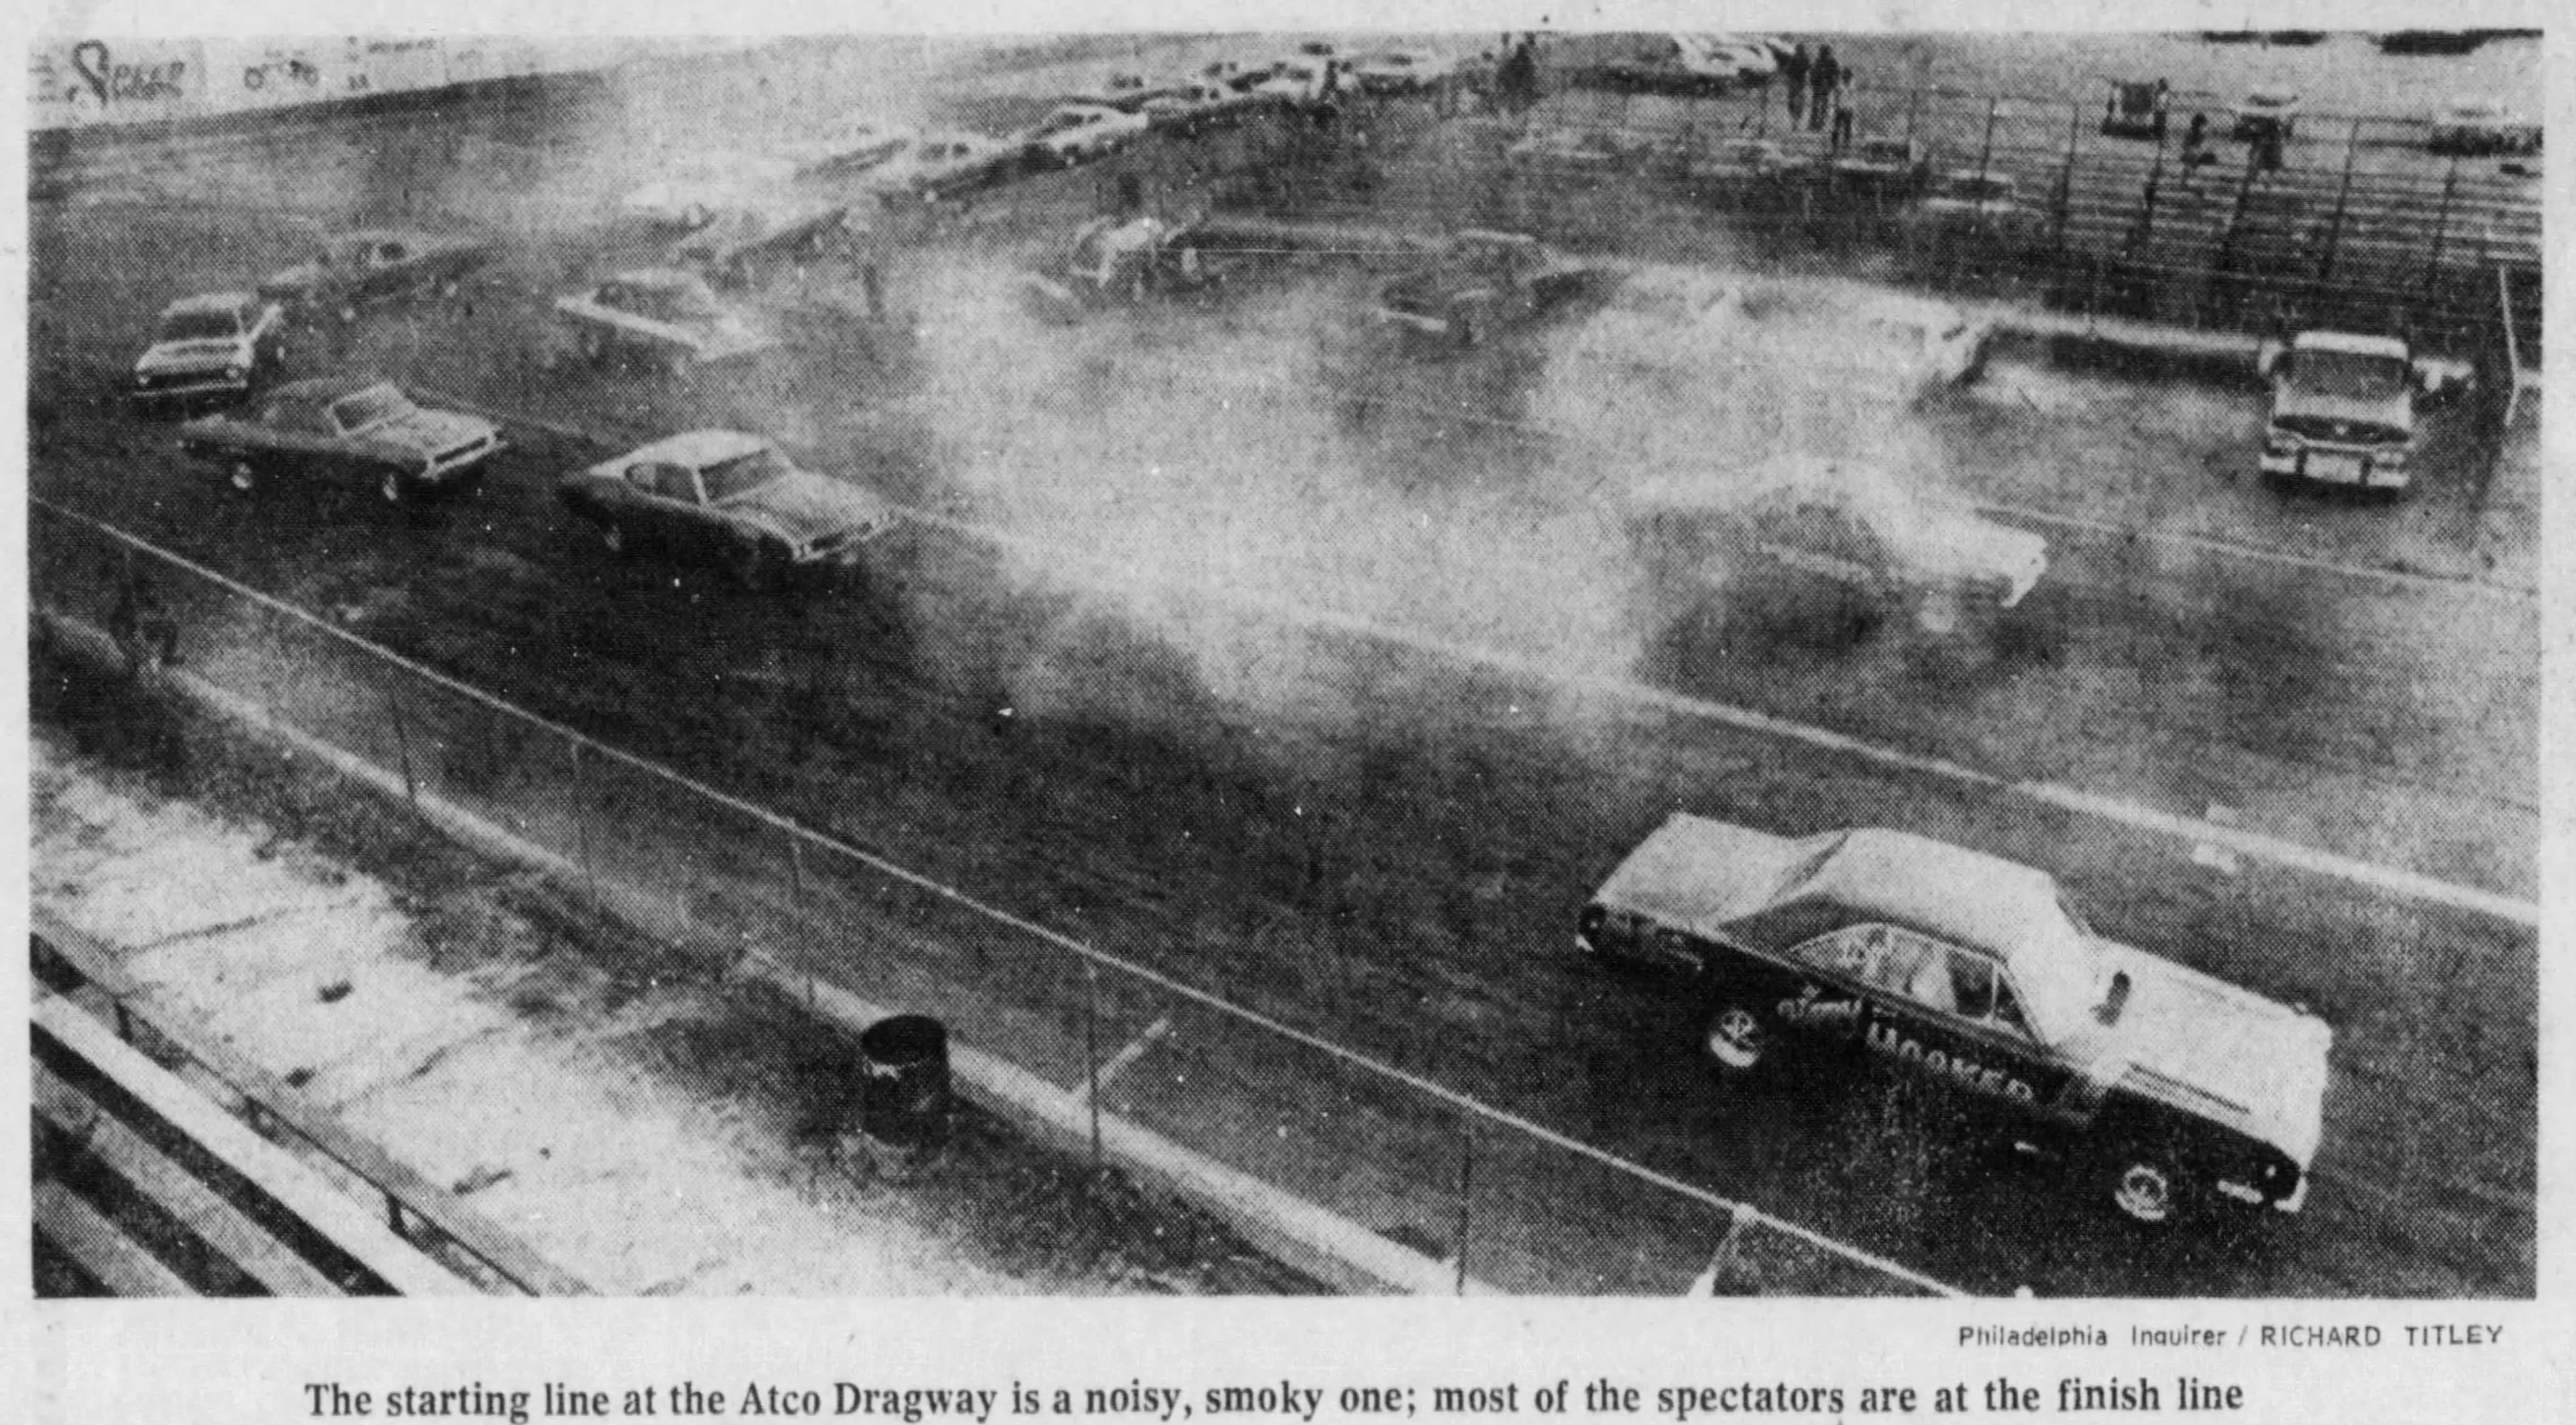 The starting line at Atco Dragway, as shown in a July 6, 1975, edition of The Inquirer.